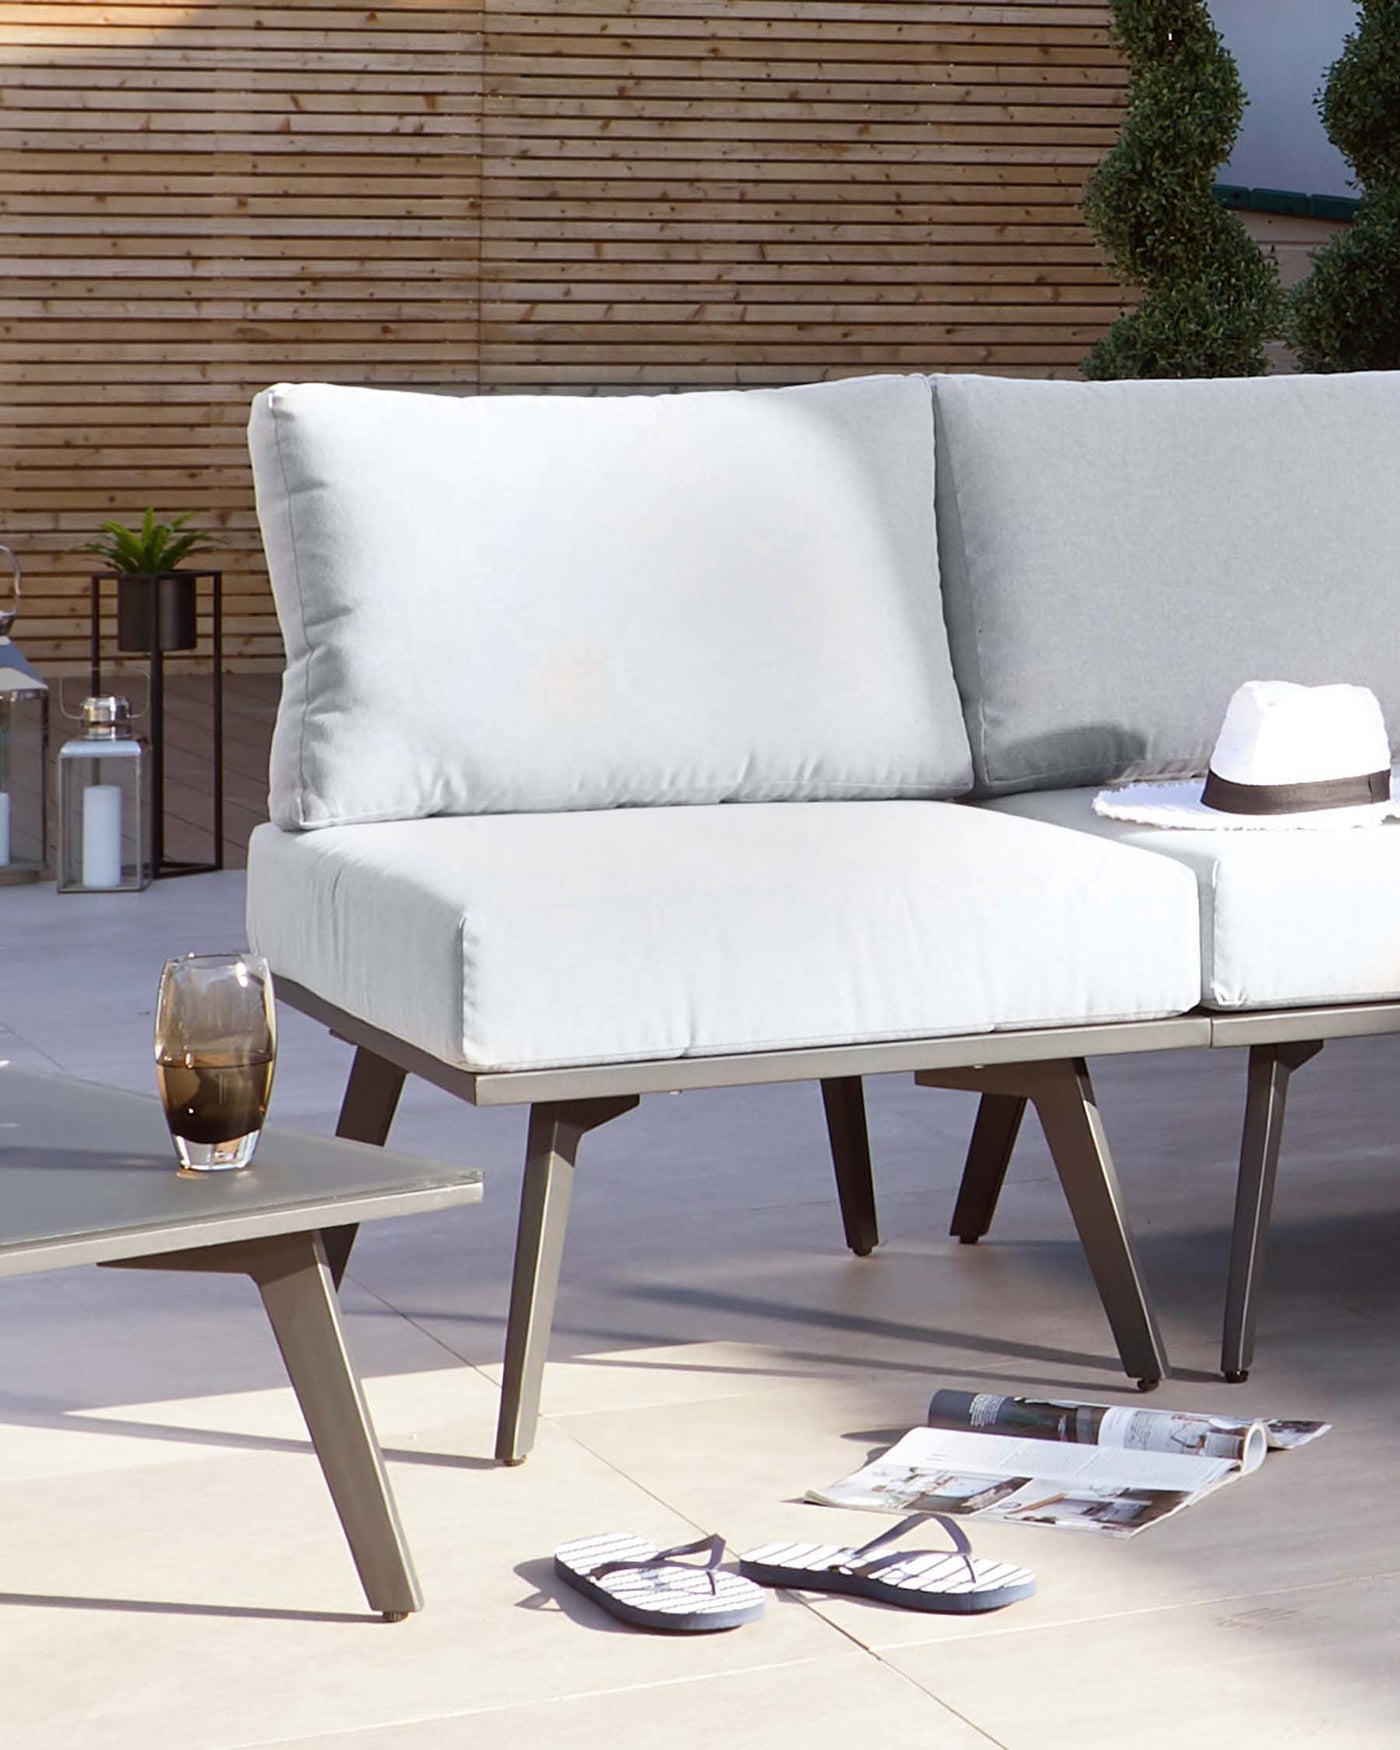 Modern outdoor two-seater sofa with light grey cushions and black angular metal frame, alongside a matching low-profile rectangular metal coffee table featuring a grey tabletop. The setting suggests a contemporary patio style.